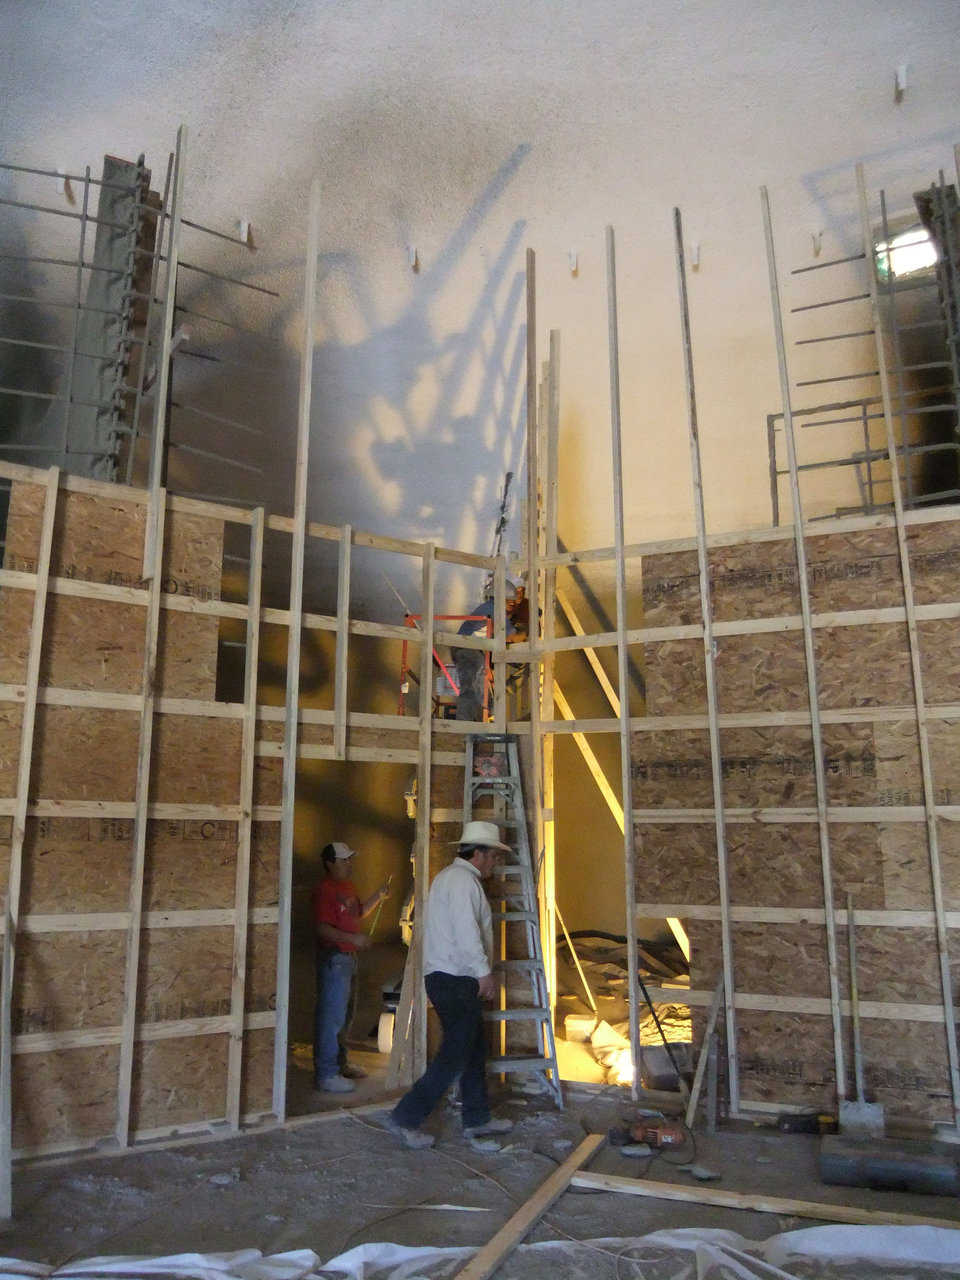 Single-side forms — A single-side form system is much faster to build and needs less materials. In this innovative system, walls are formed with plywood, then sprayed with shotcrete to create an ultra-strong structure.